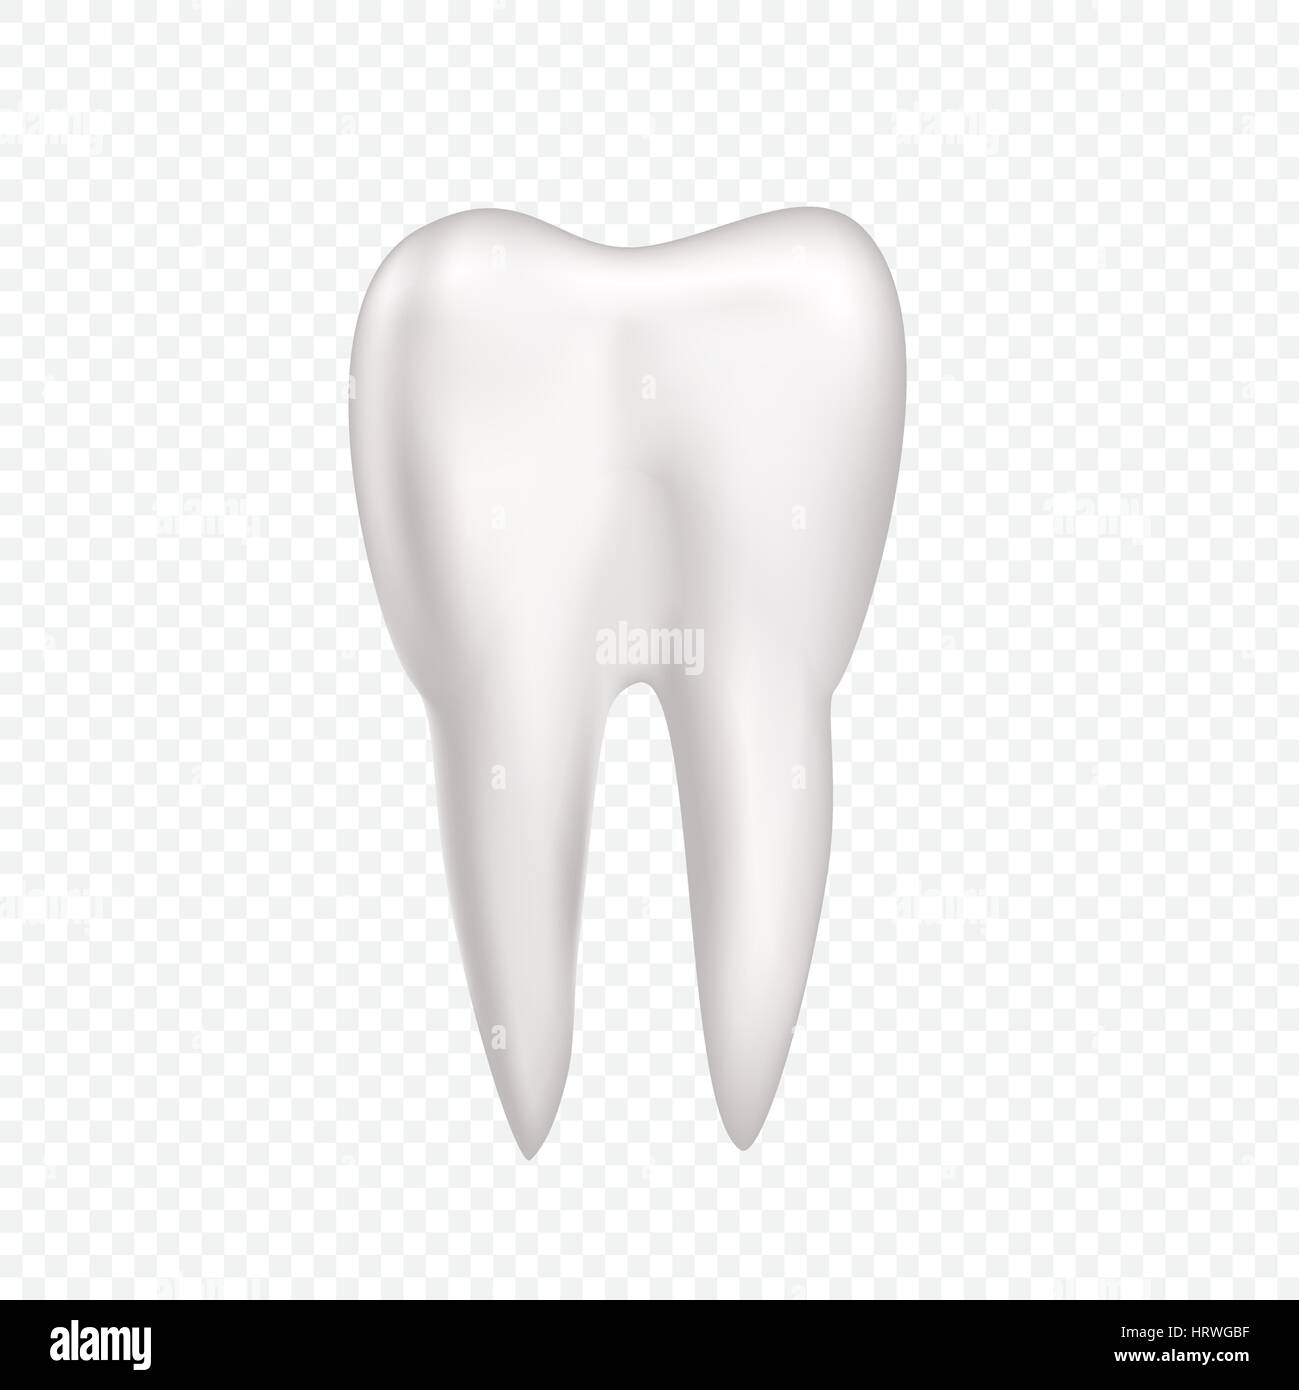 Tooth on transparent background Stock Vector